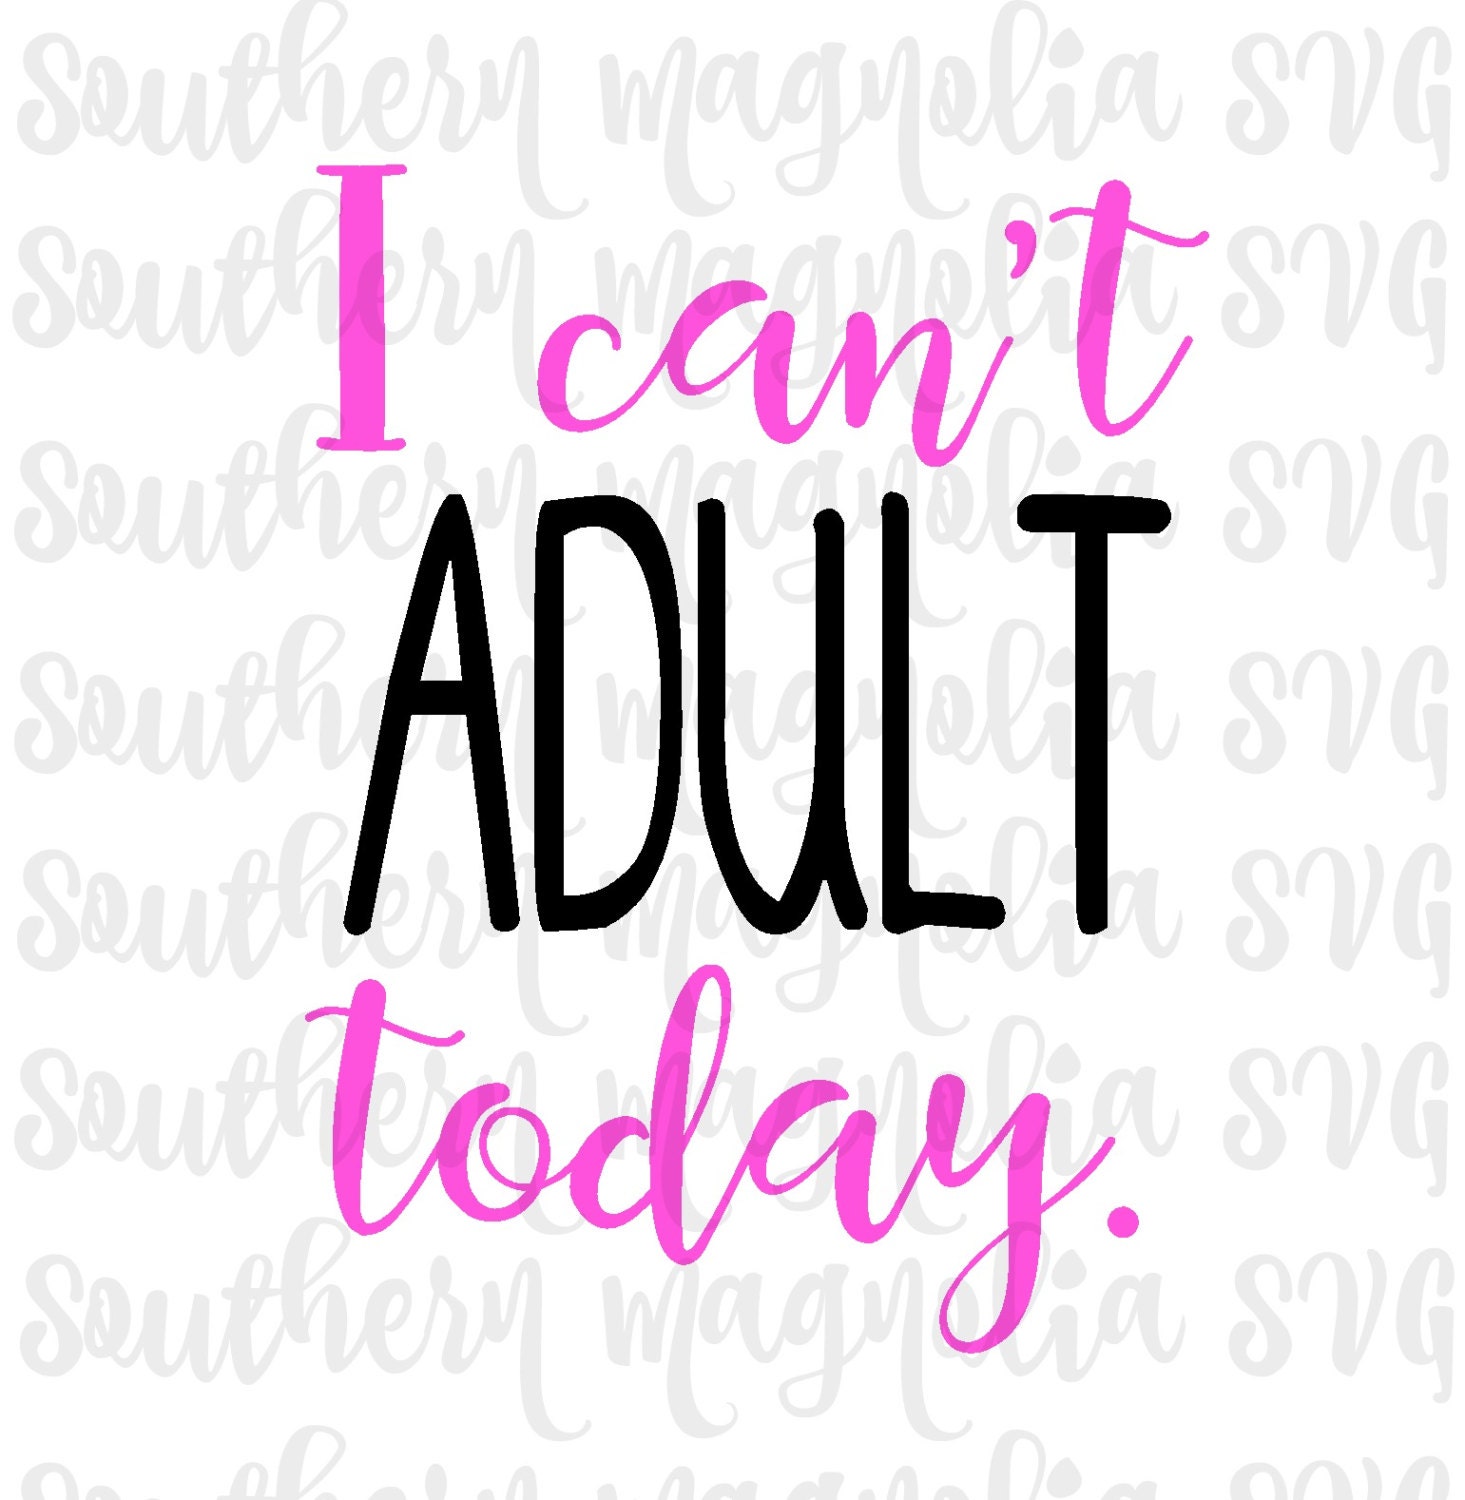 I Can't Adult Today Silhouette Cricut Cut File SVG